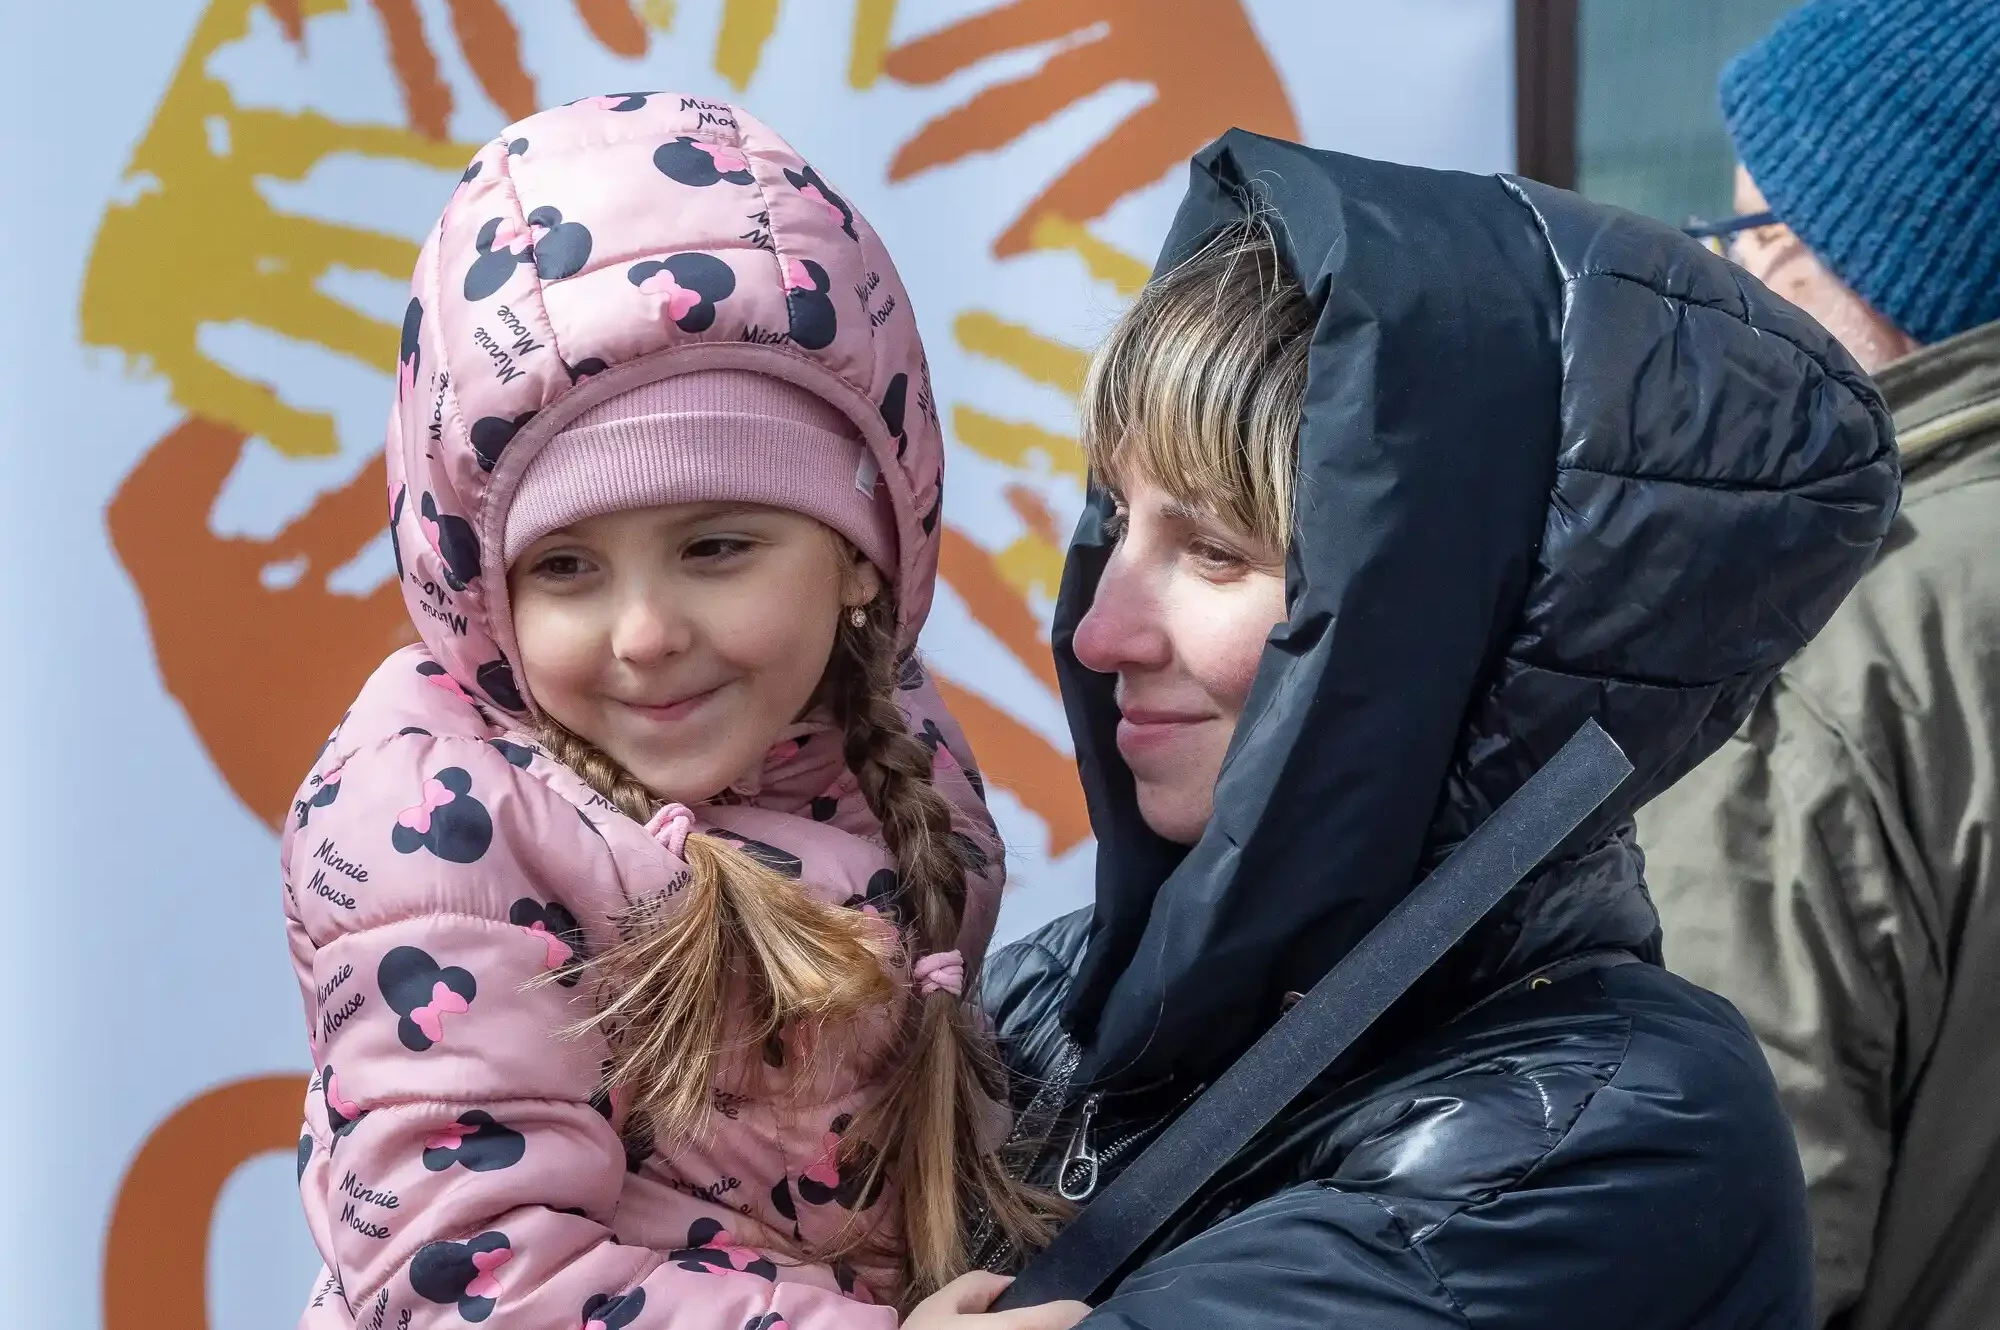 Ukrainian refugee Marina embraces her daughter, Arina, moments after passing through border control into Poland near the town of Hrebenne. Mother and daughter were fleeing the Sumy region in Northwest Ukraine. CARE is working with our partners Polish Humanitarian Action (PAH) at the border and elsewhere to provide food, water, clothing and other necessities to refugees.